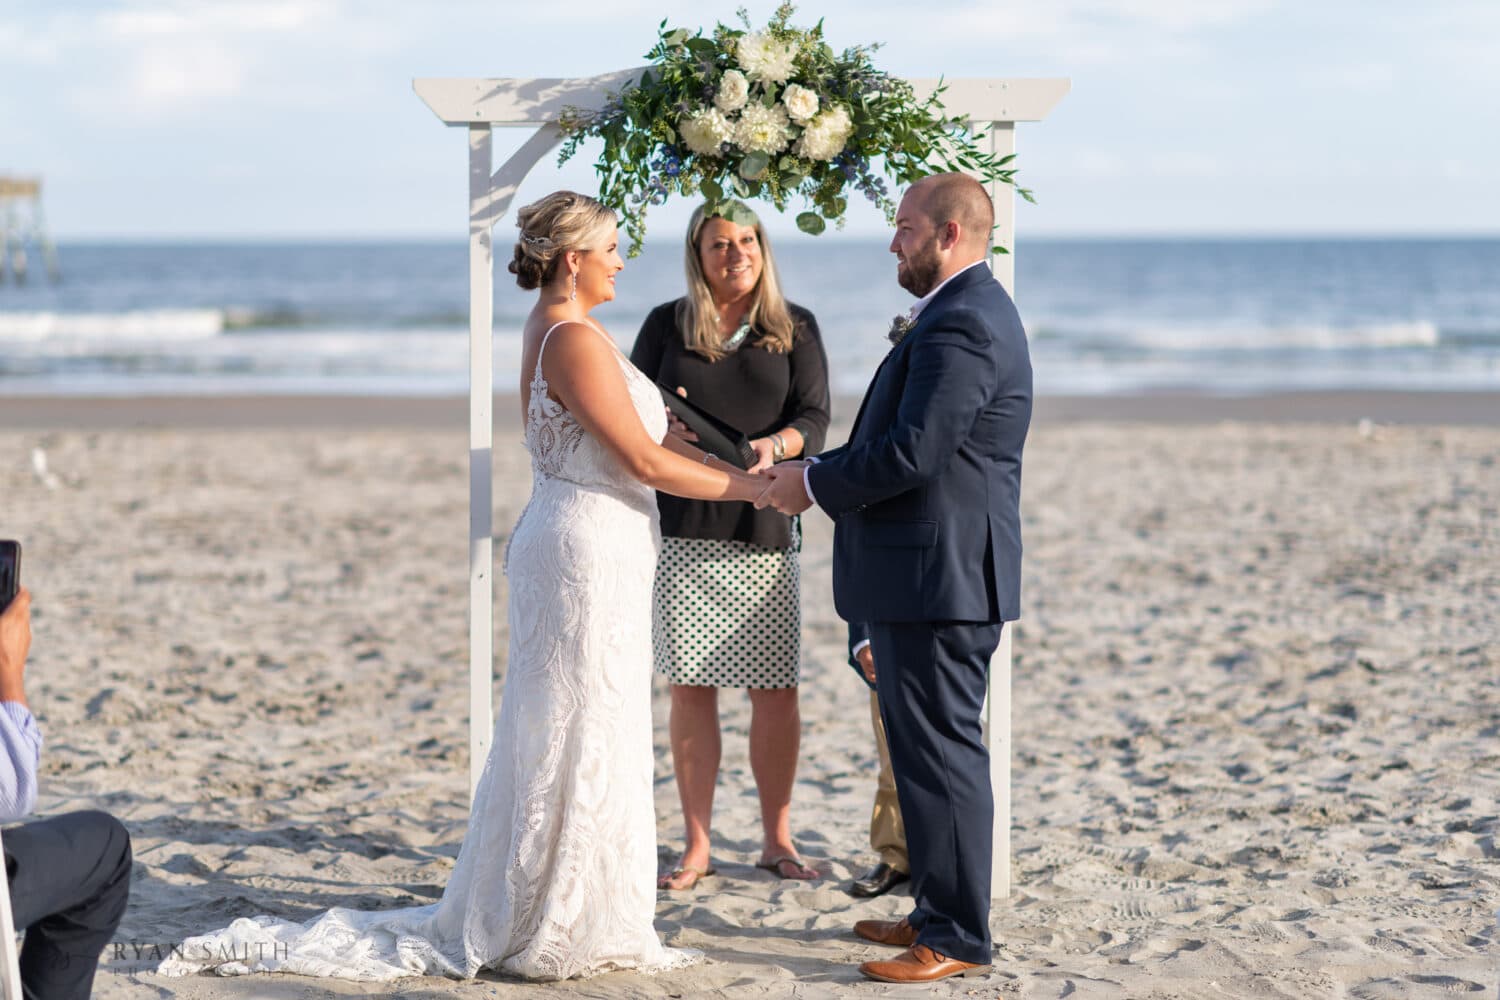 Holding hands during the ceremony - Folly Beach - Charleston